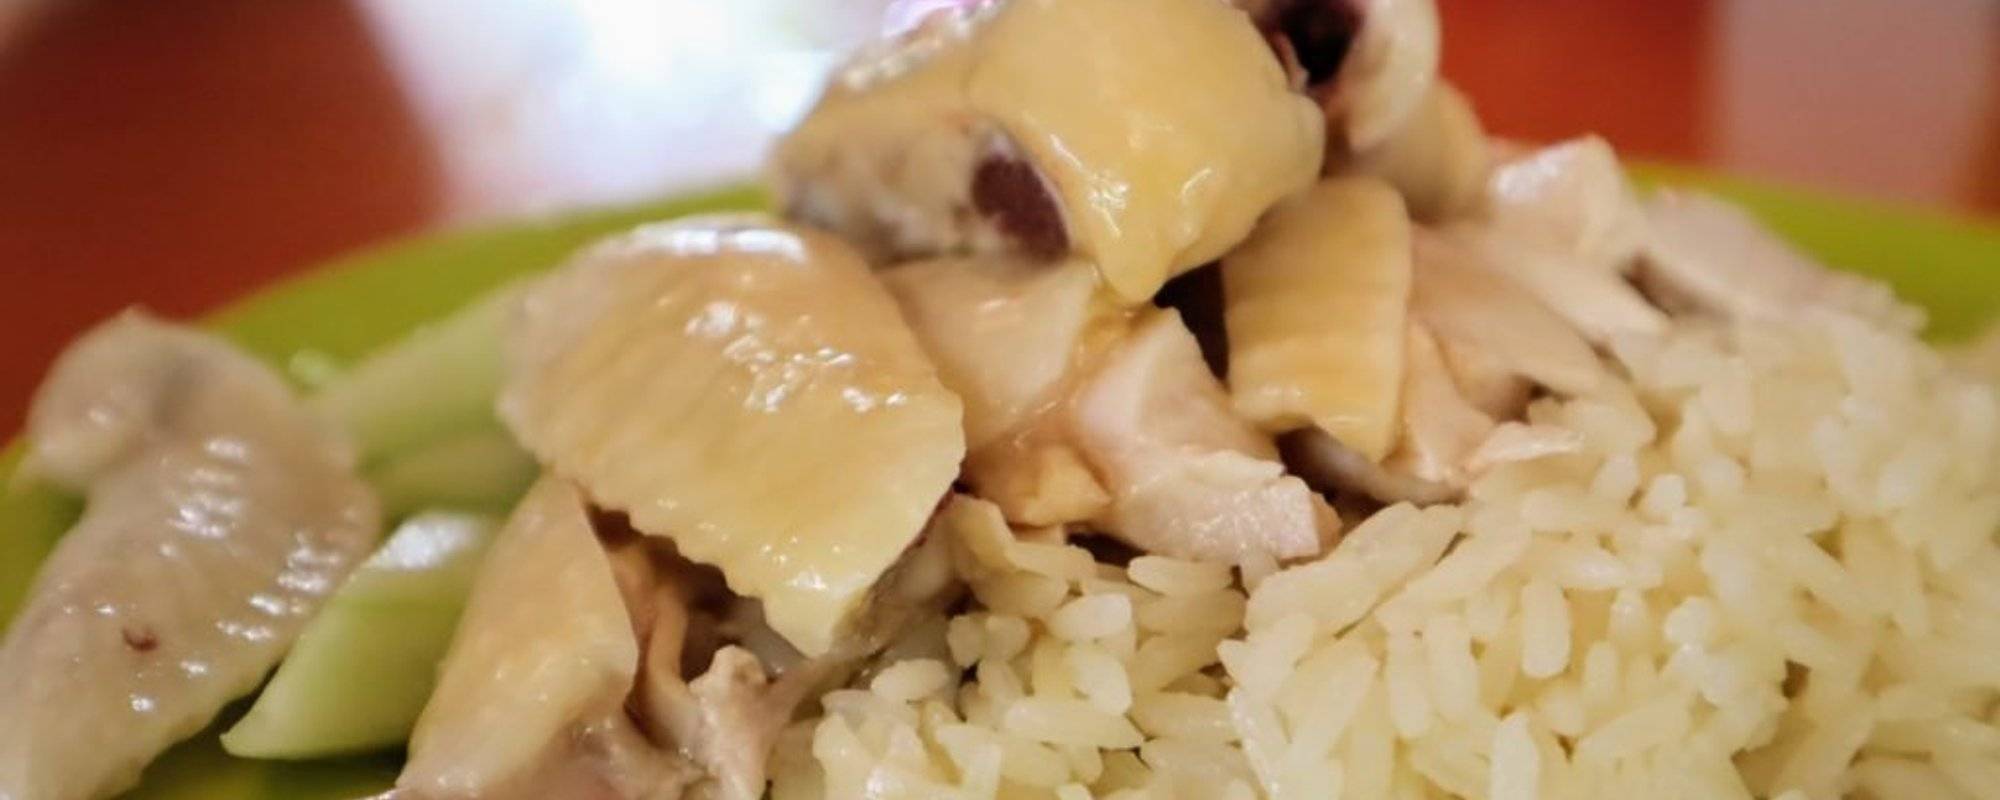 The famous Tian Tian Hainanese Chicken Rice in Singapore